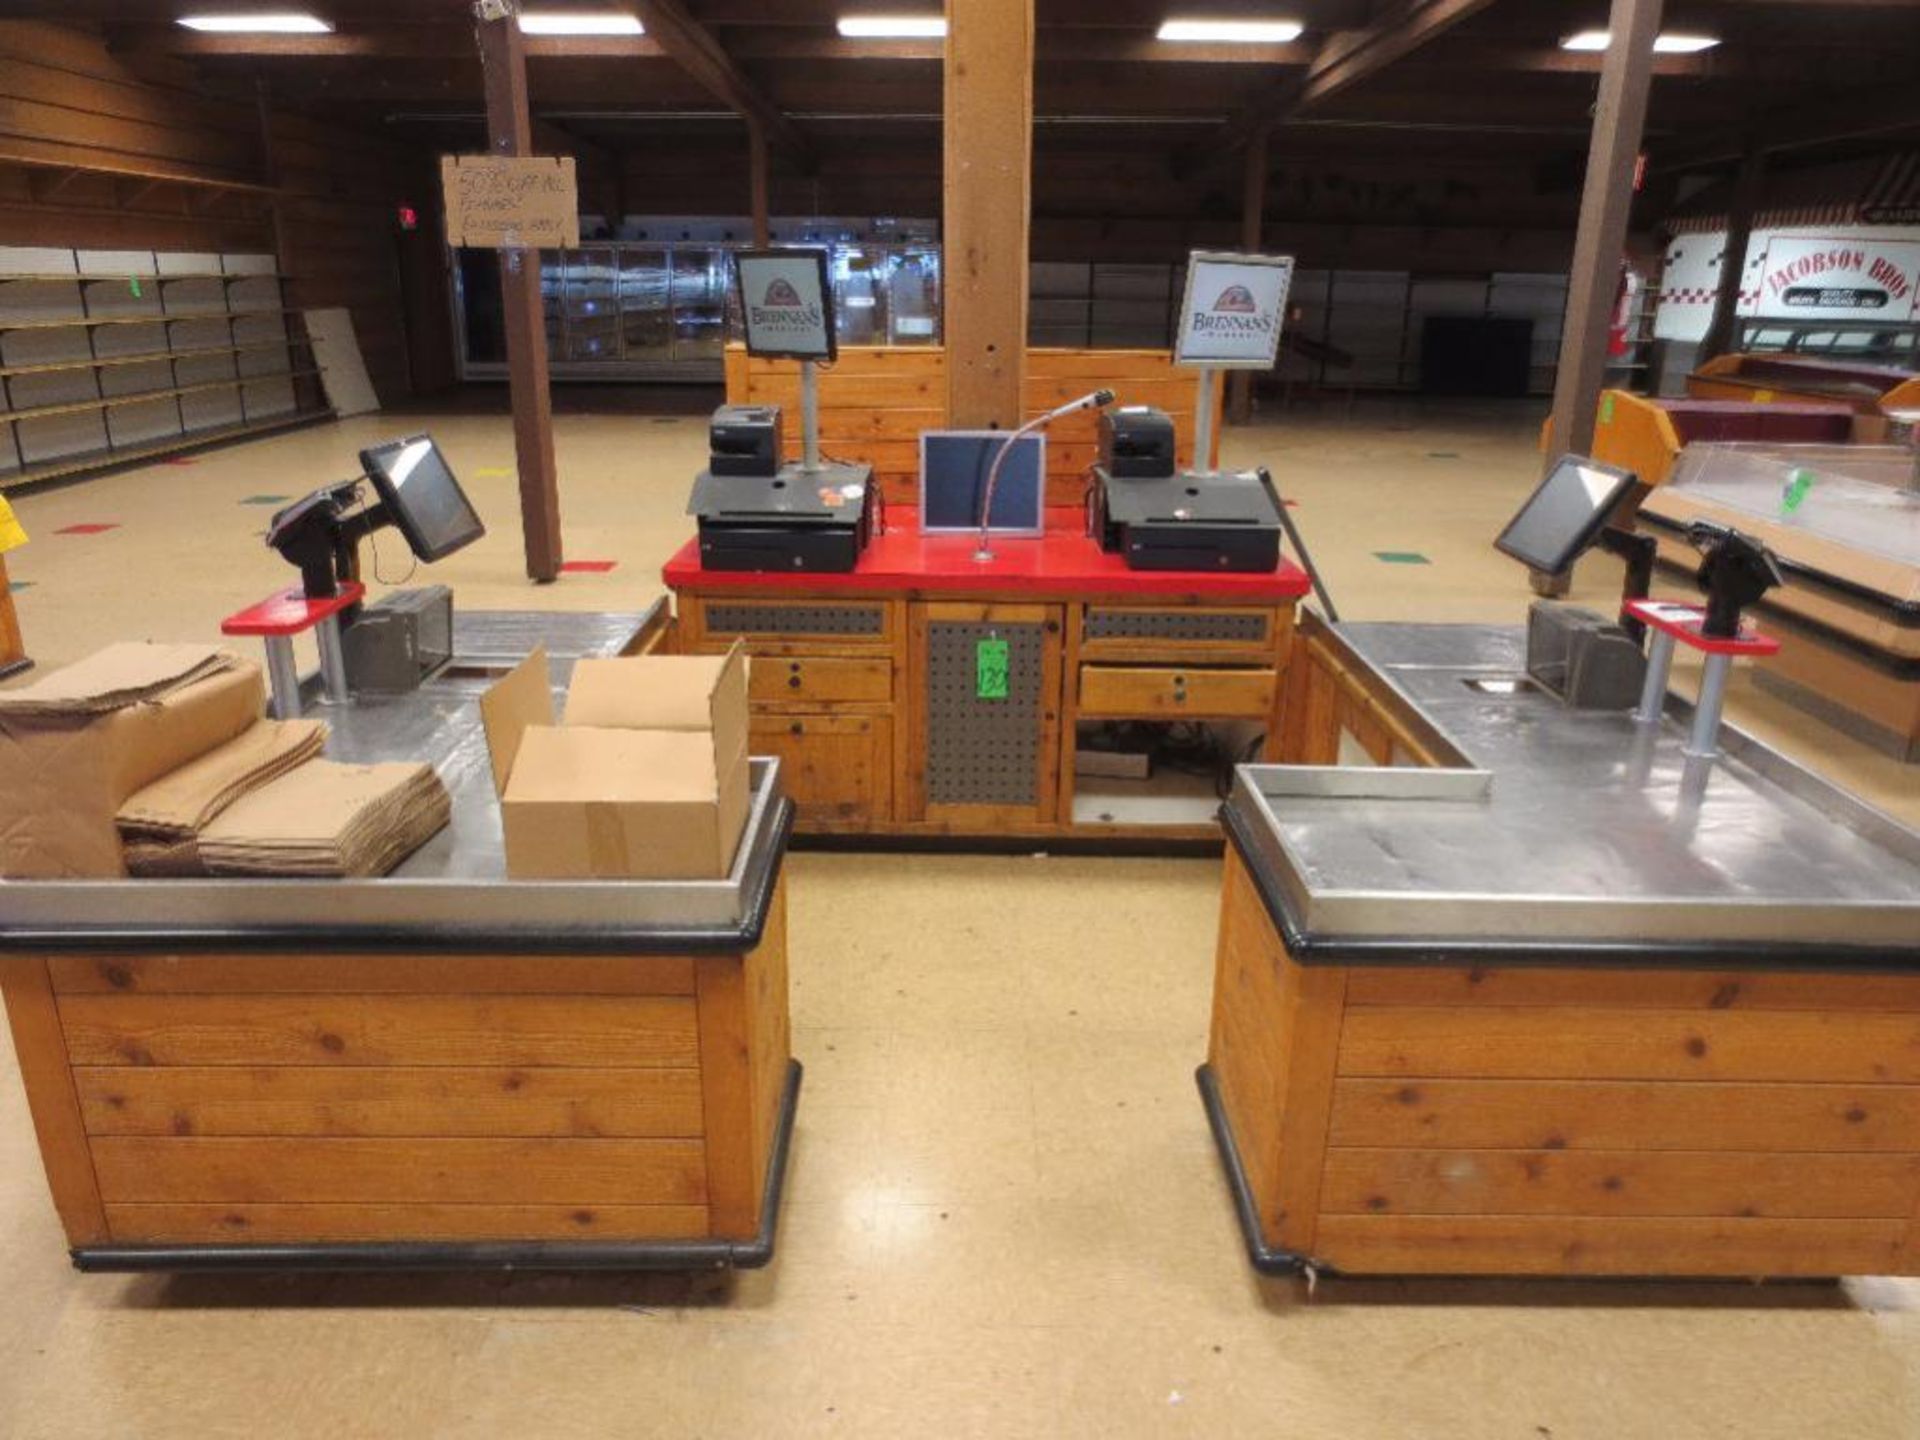 Large Island Point of Sale Checkout with Registers, Monitors, Scanners, Card Readers and Display